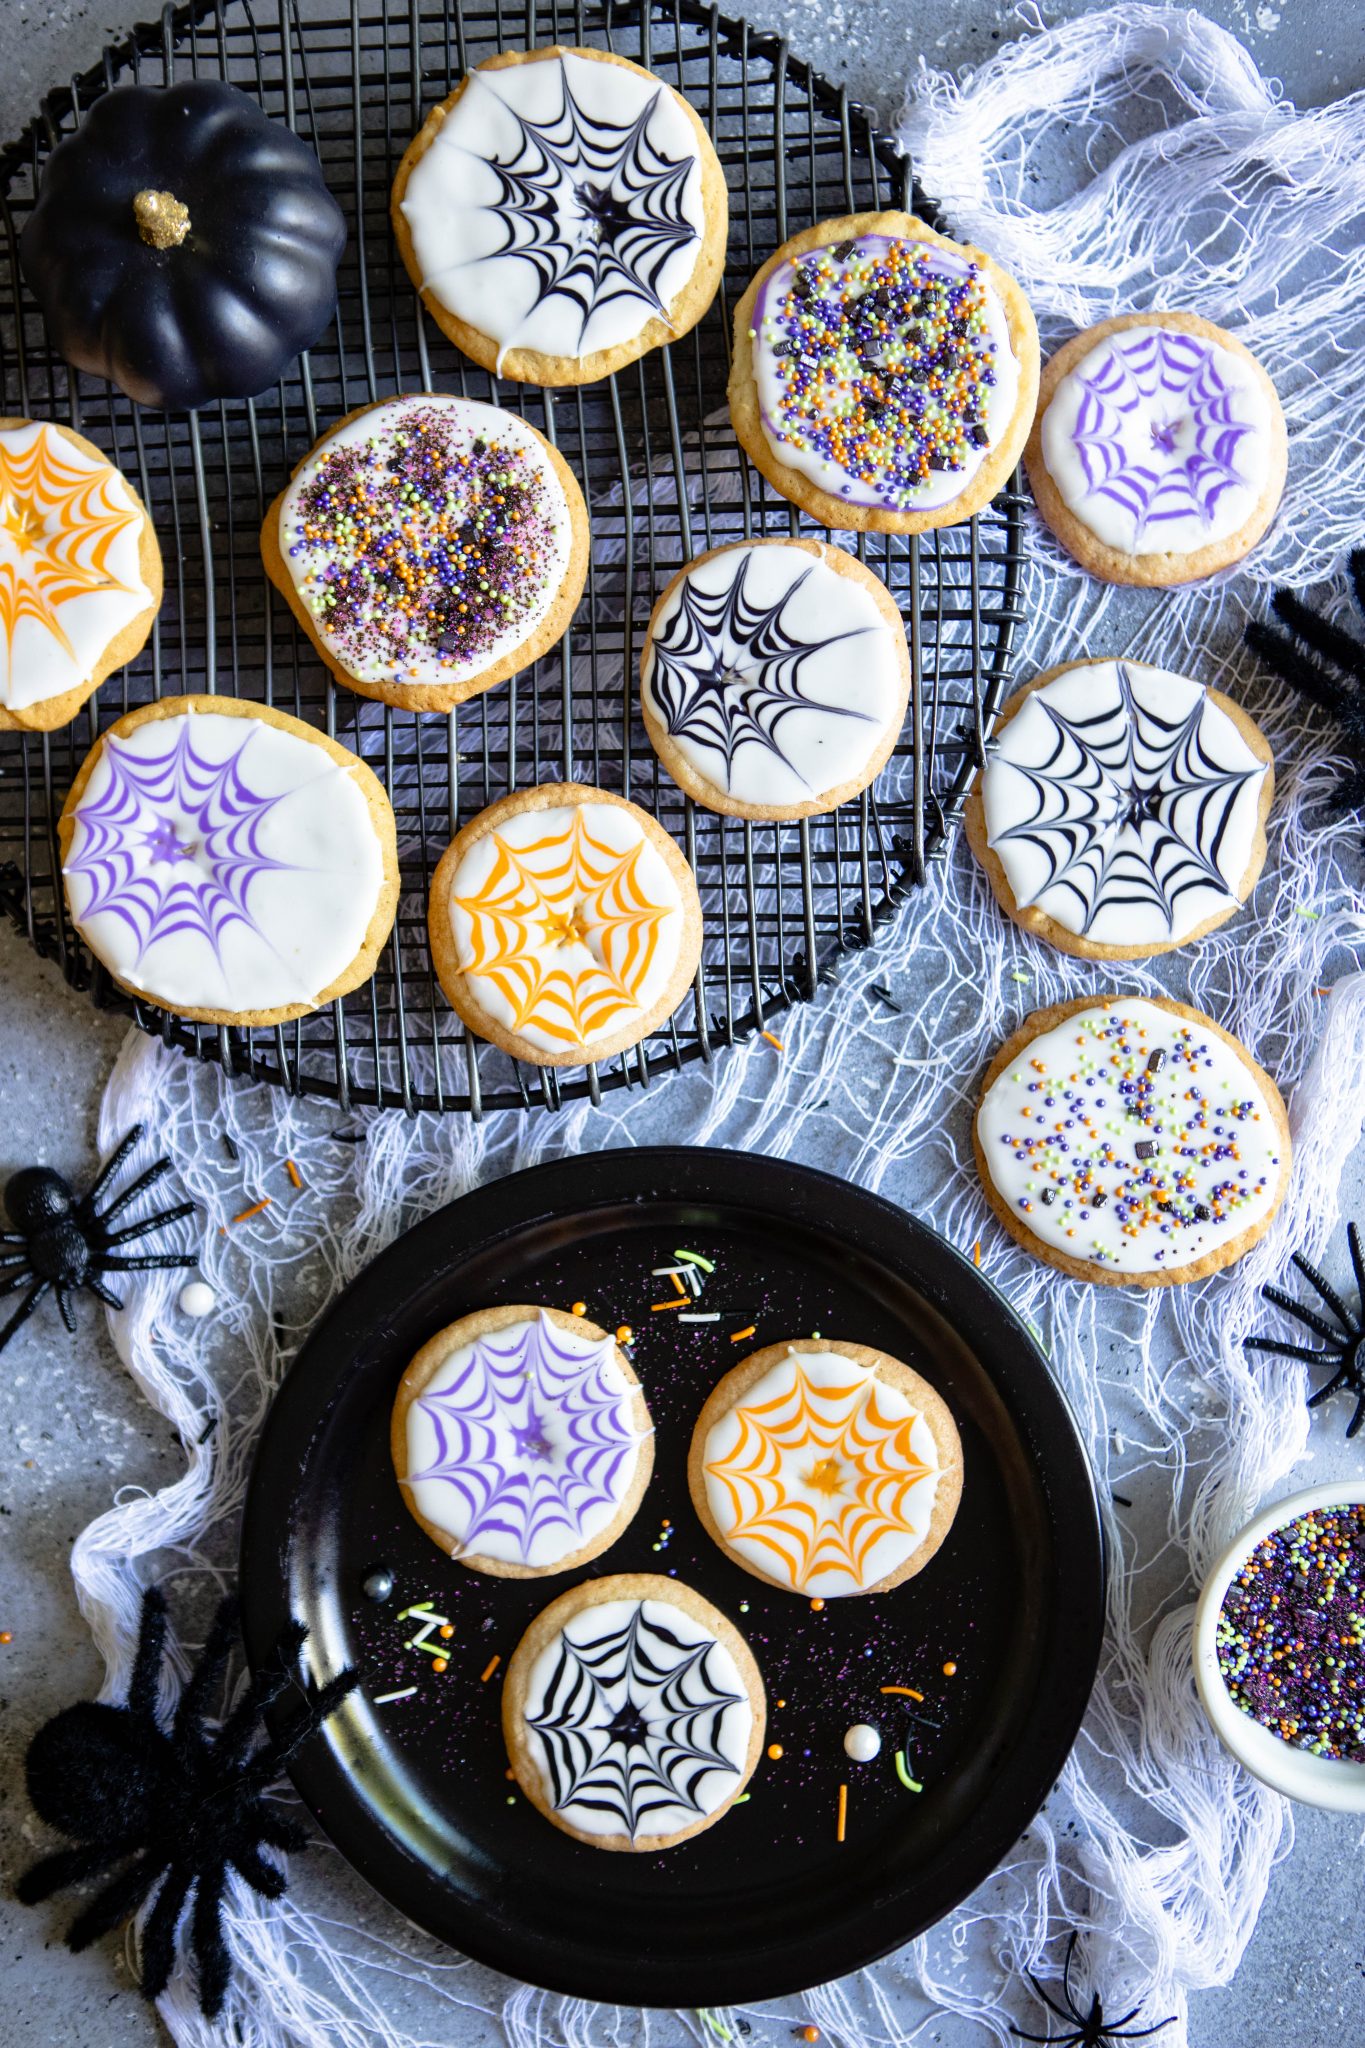 A spread of Halloween cookies decorated with Royal Icing and Spider Webs